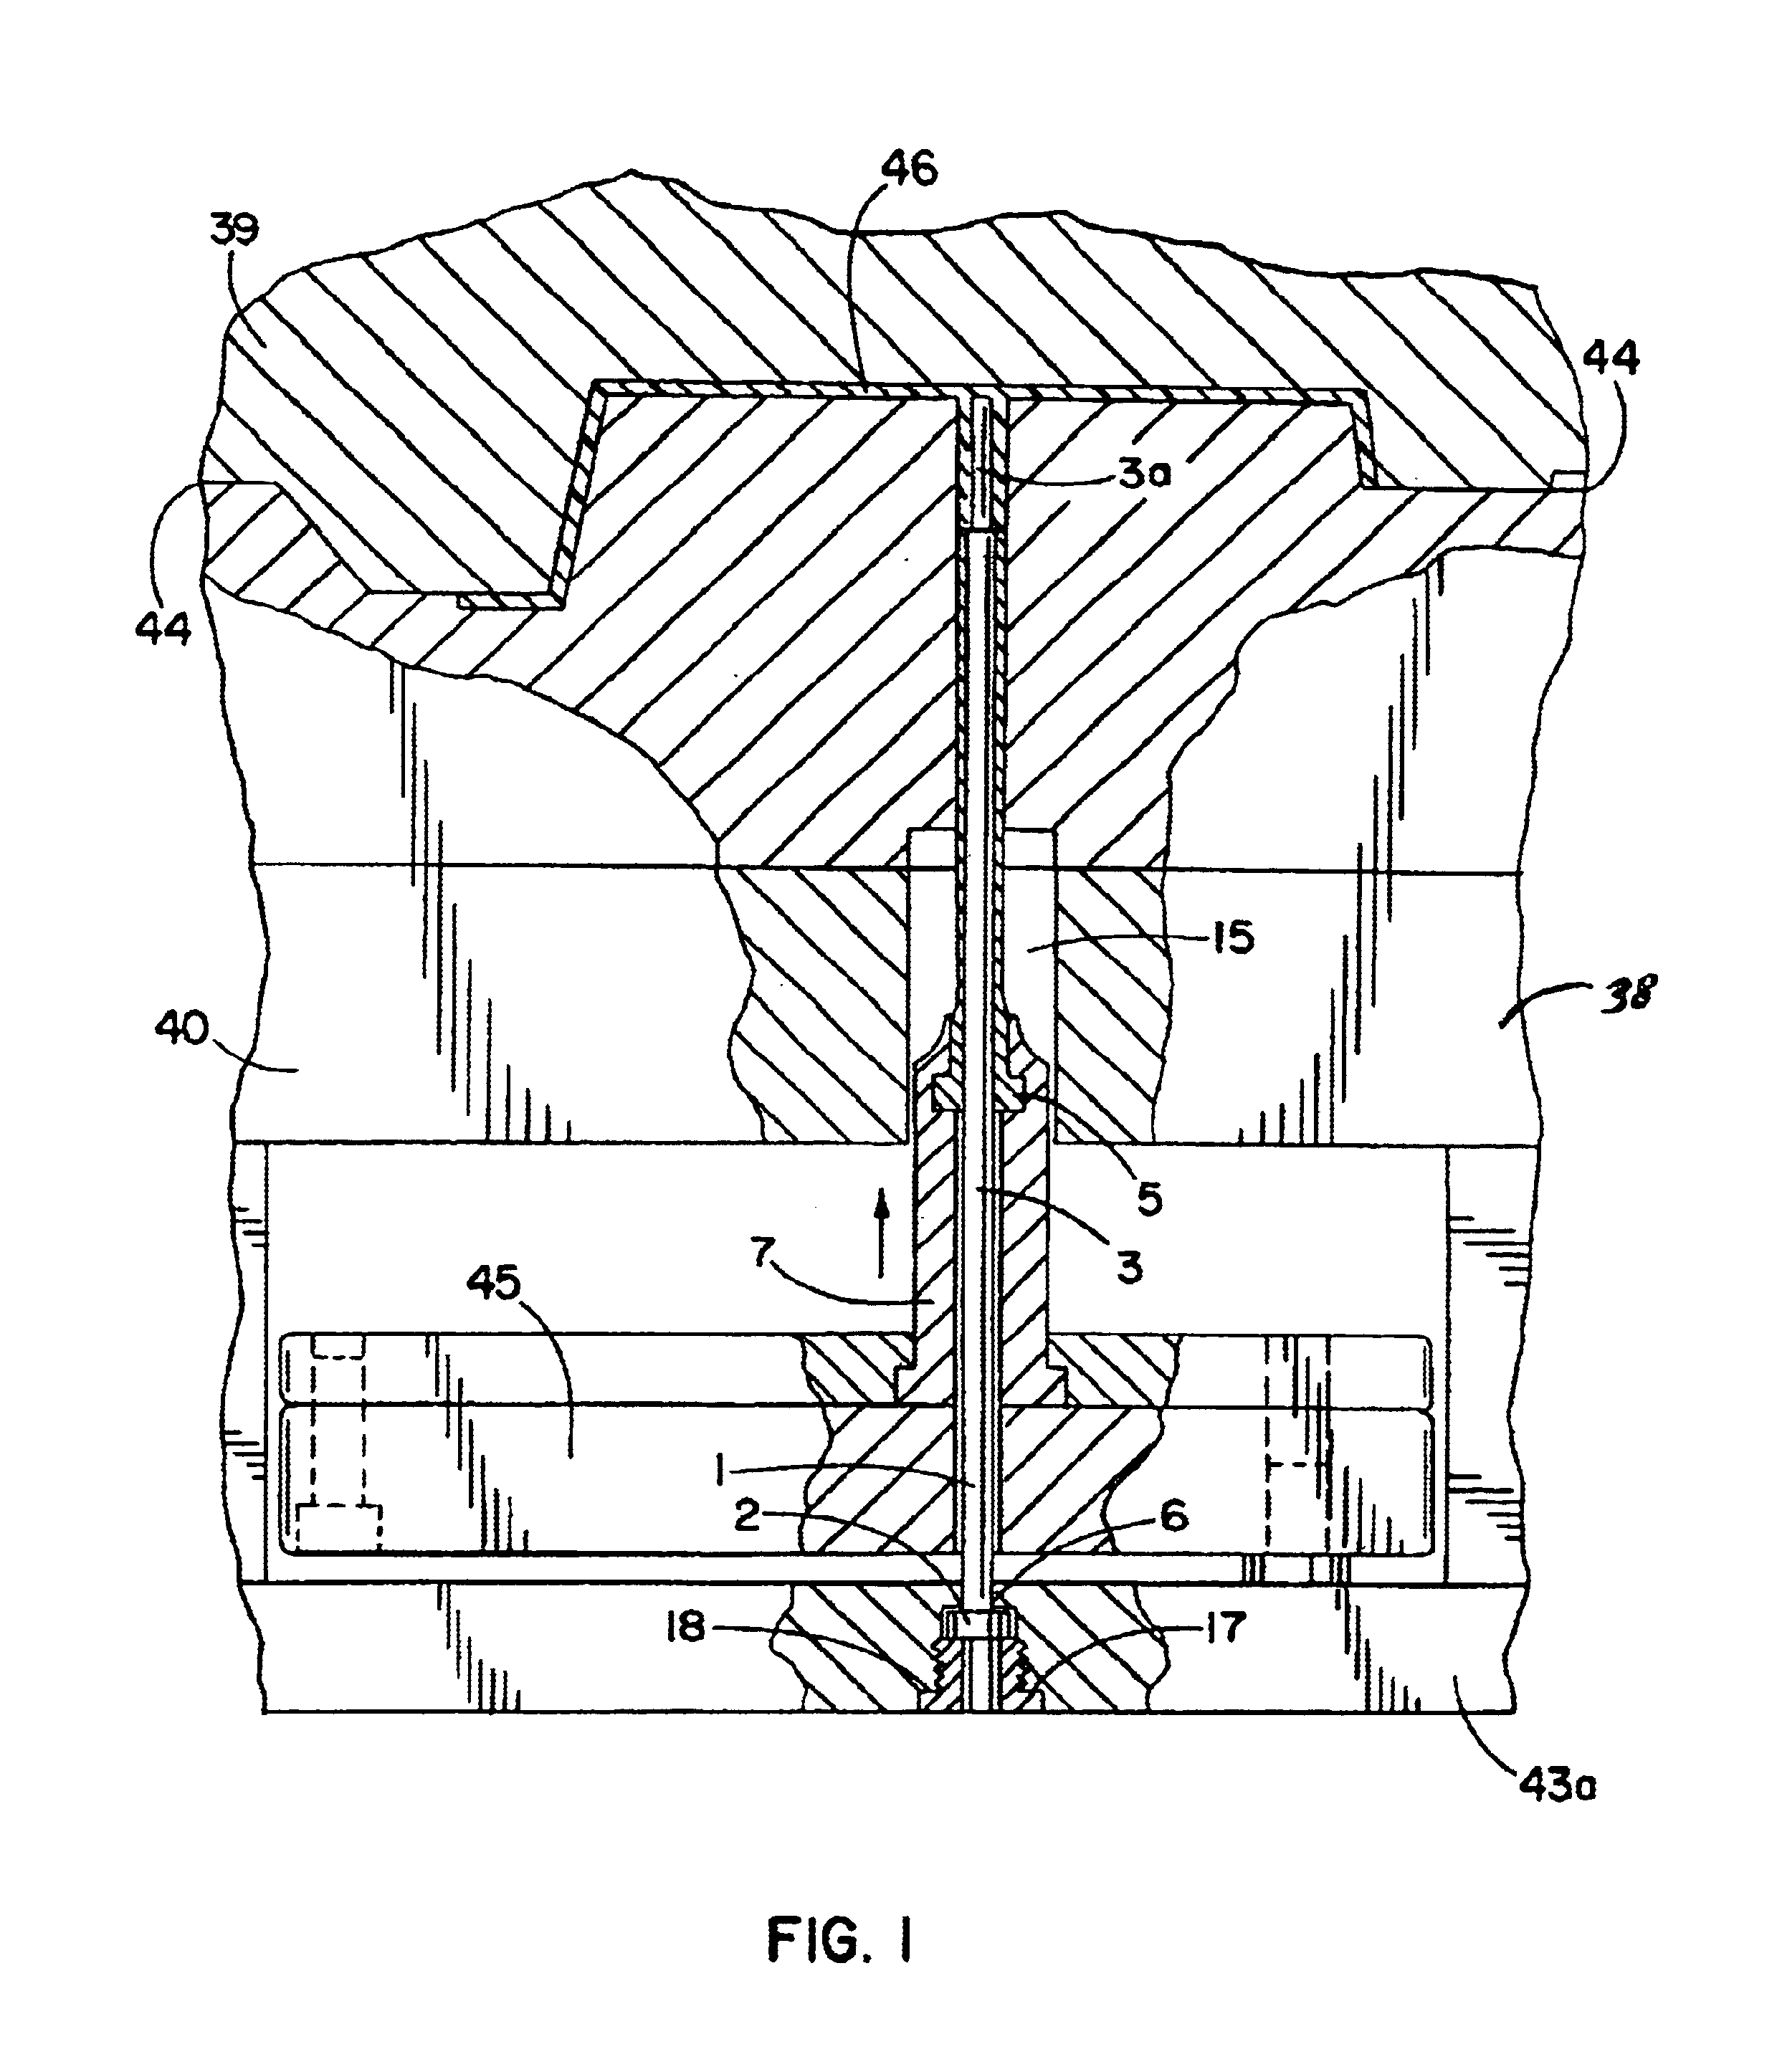 Ejector sleeve for molding a raised aperture in a molded article